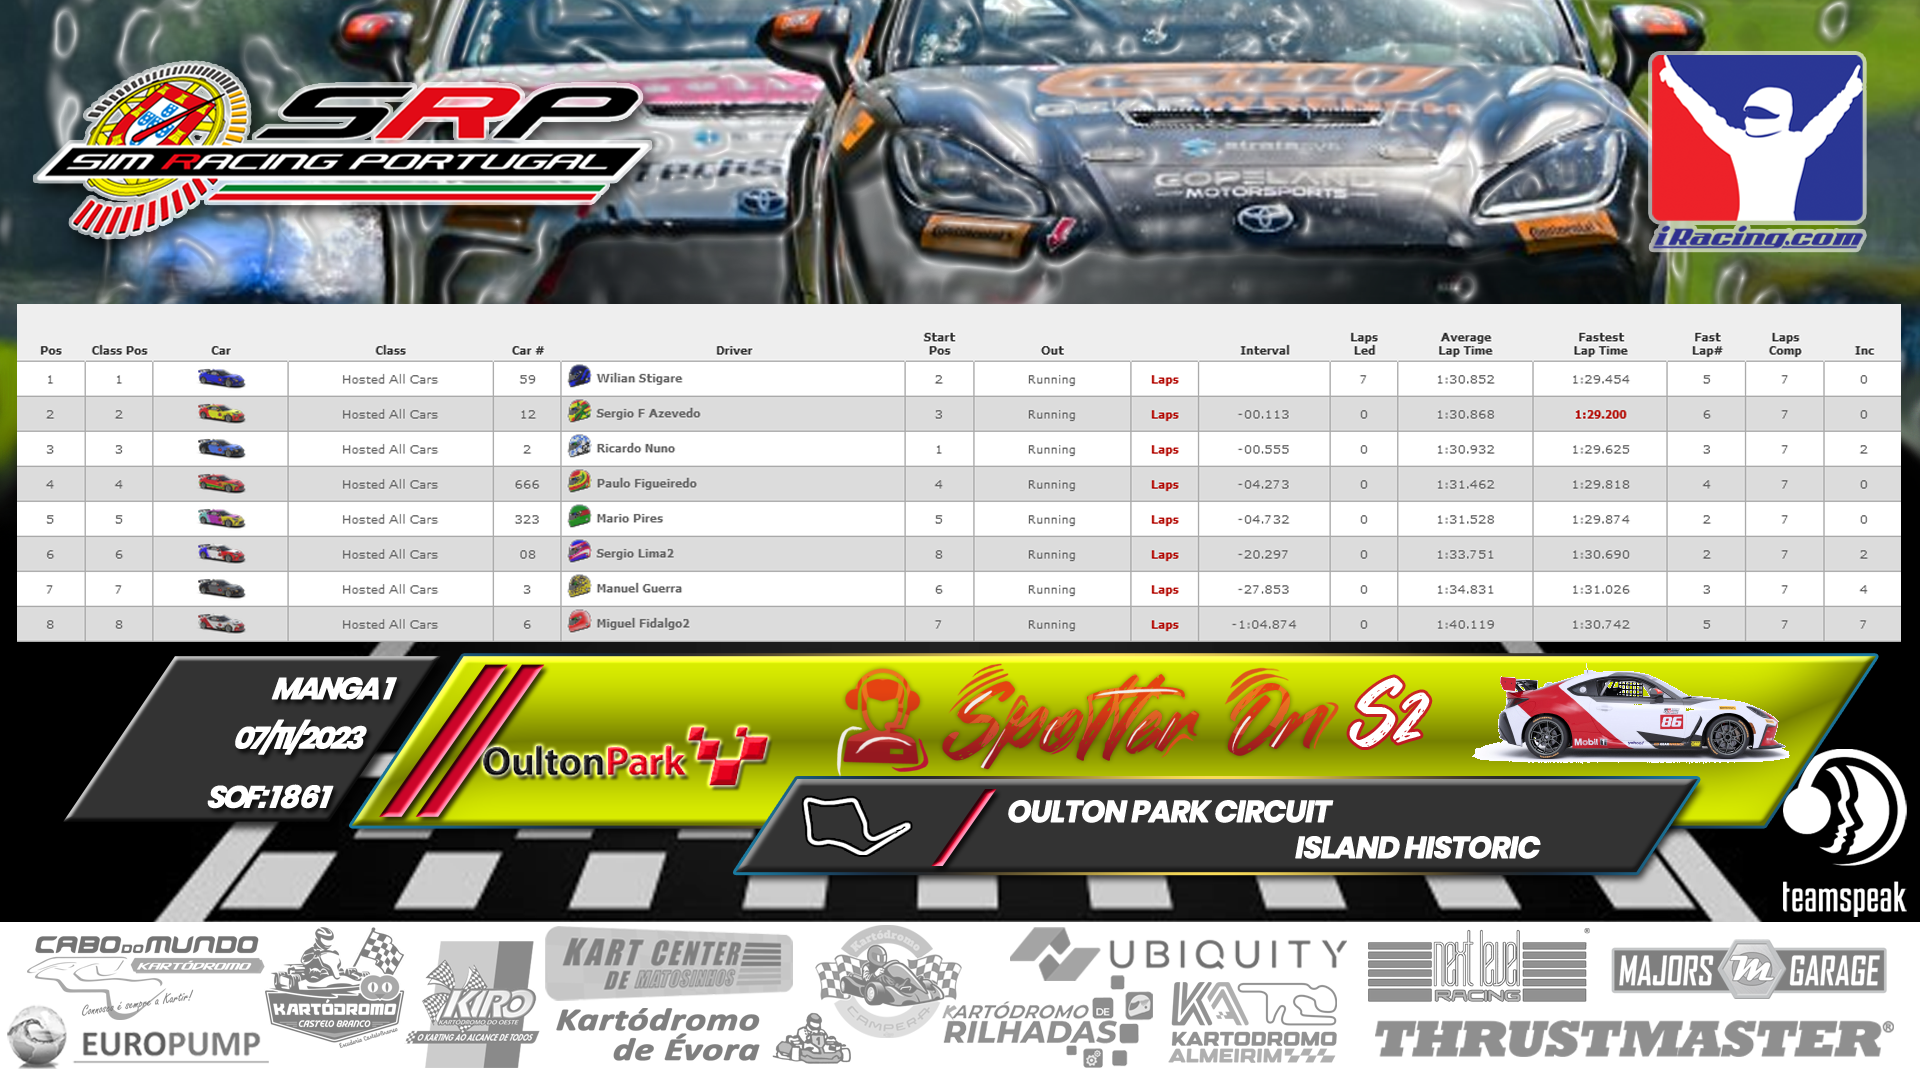 [Image: RaceResults-SpotterOnS2-1-1.png]